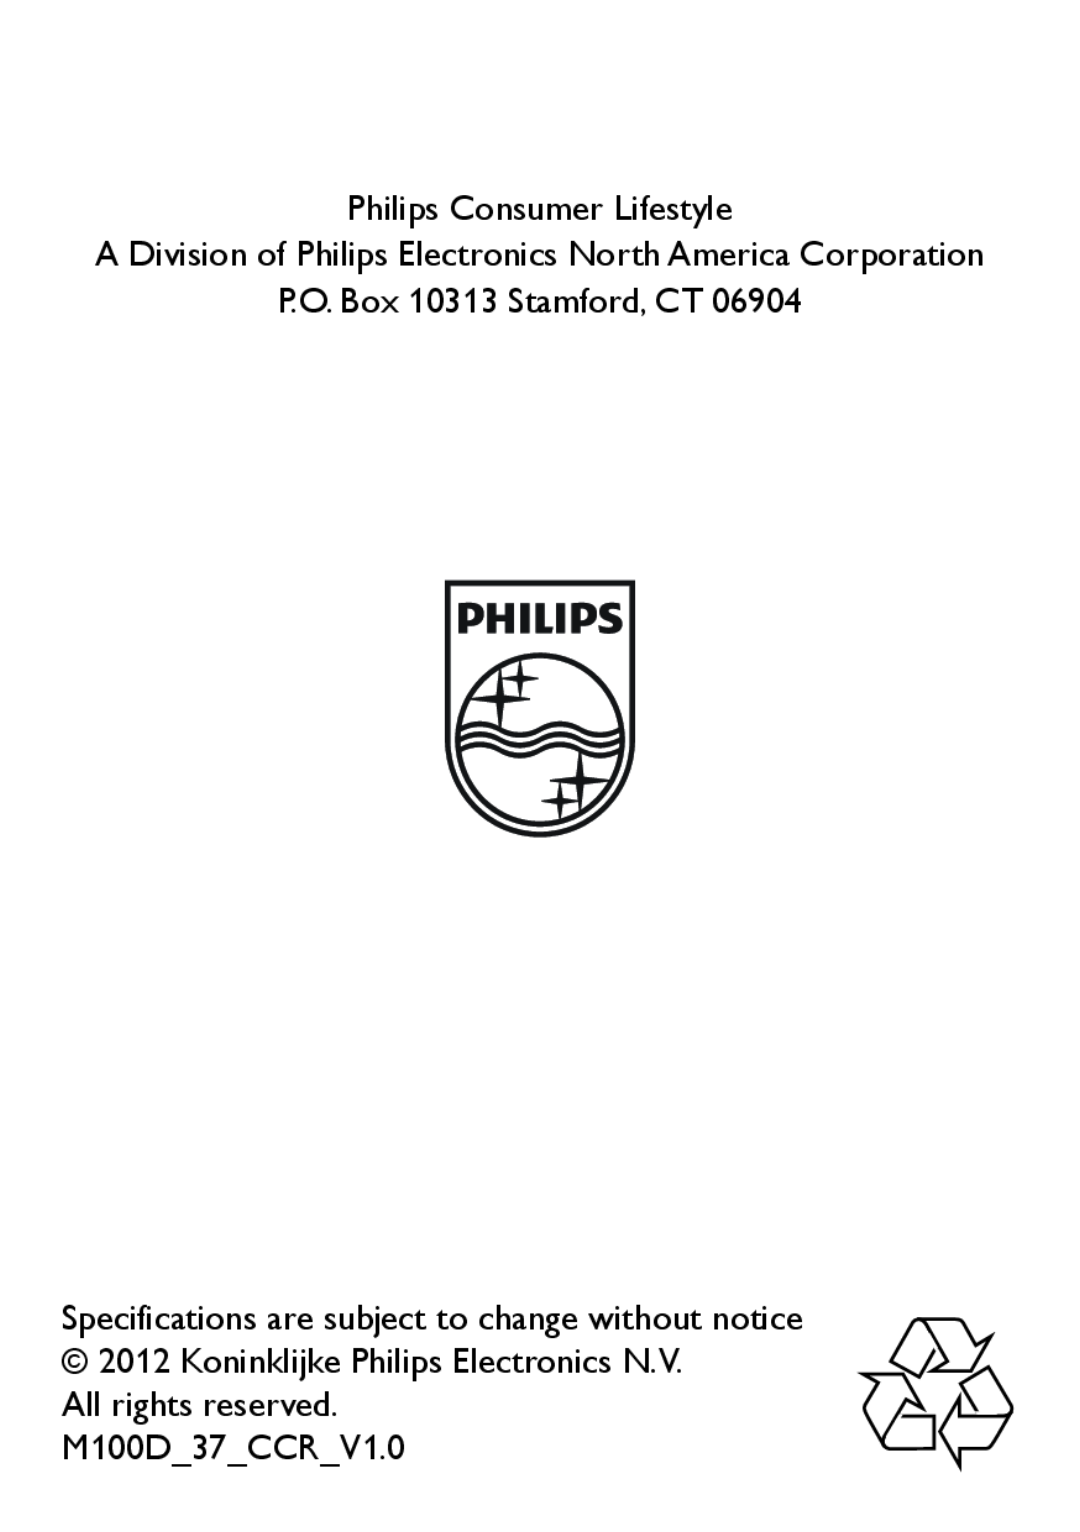 Philips manual Philips Consumer Lifestyle, P.O. Box 10313 Stamford, CT, All rights reserved. M100D 37 CCR 